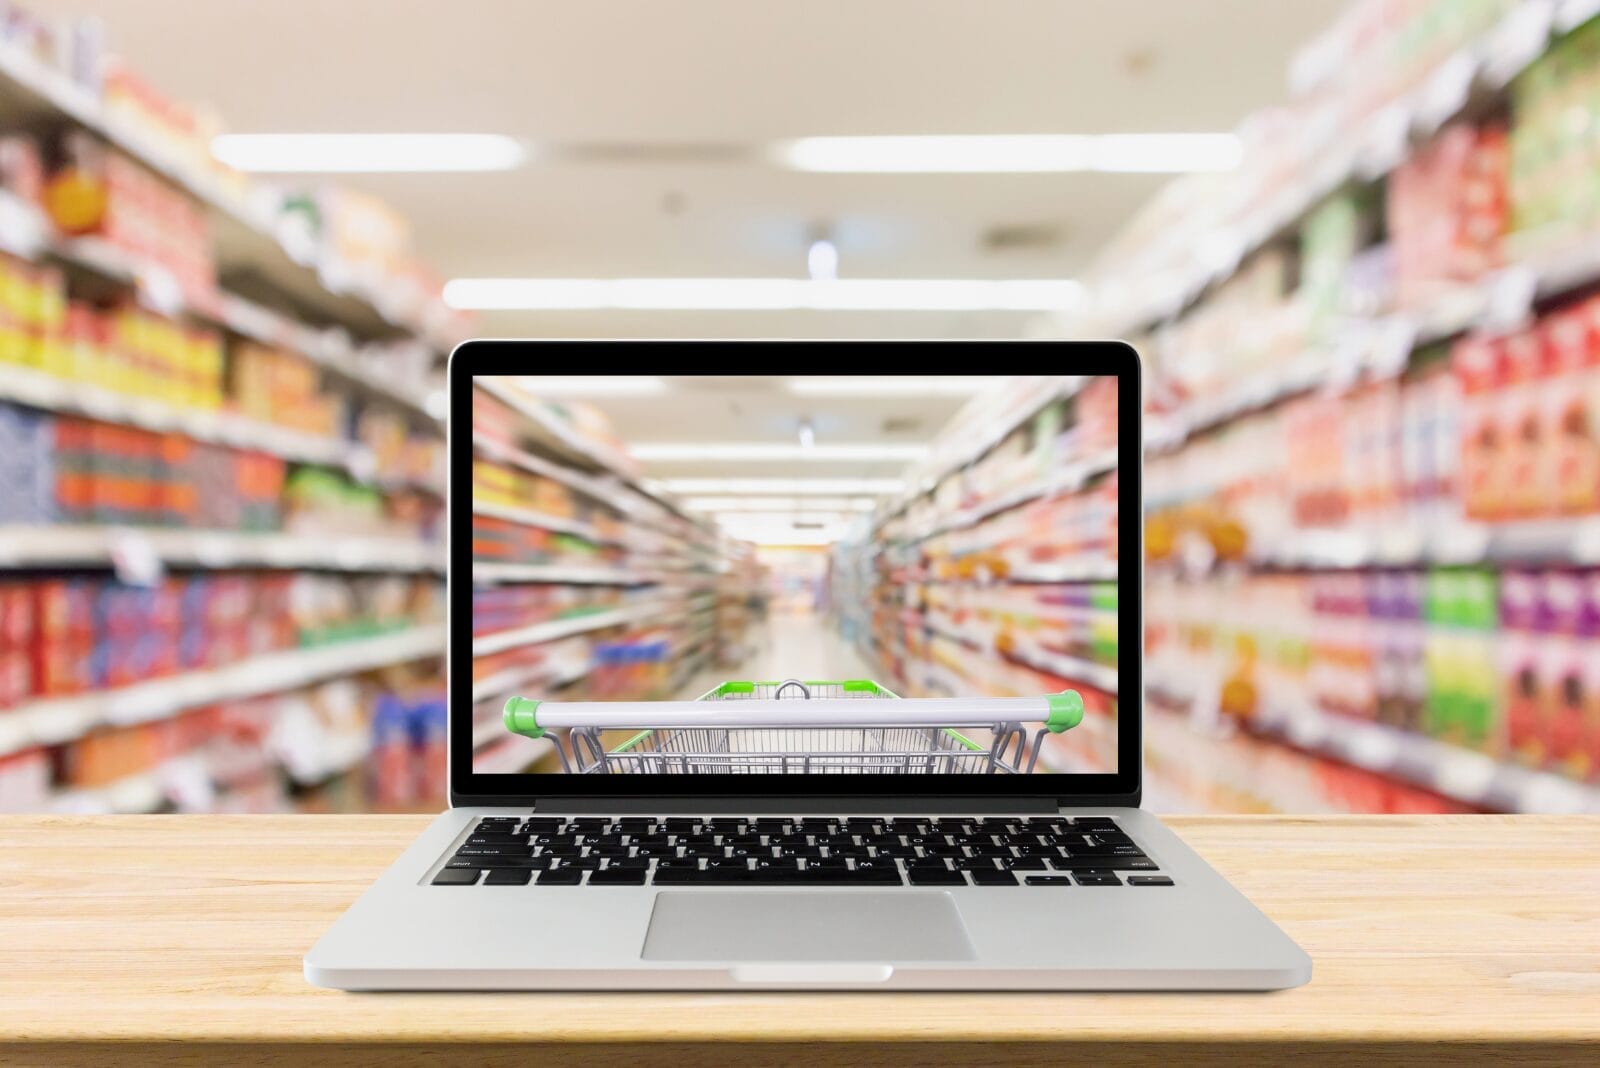 Symbolic imagery of online grocery shopping - Laptop in grocery store shows aisles and grocery cart